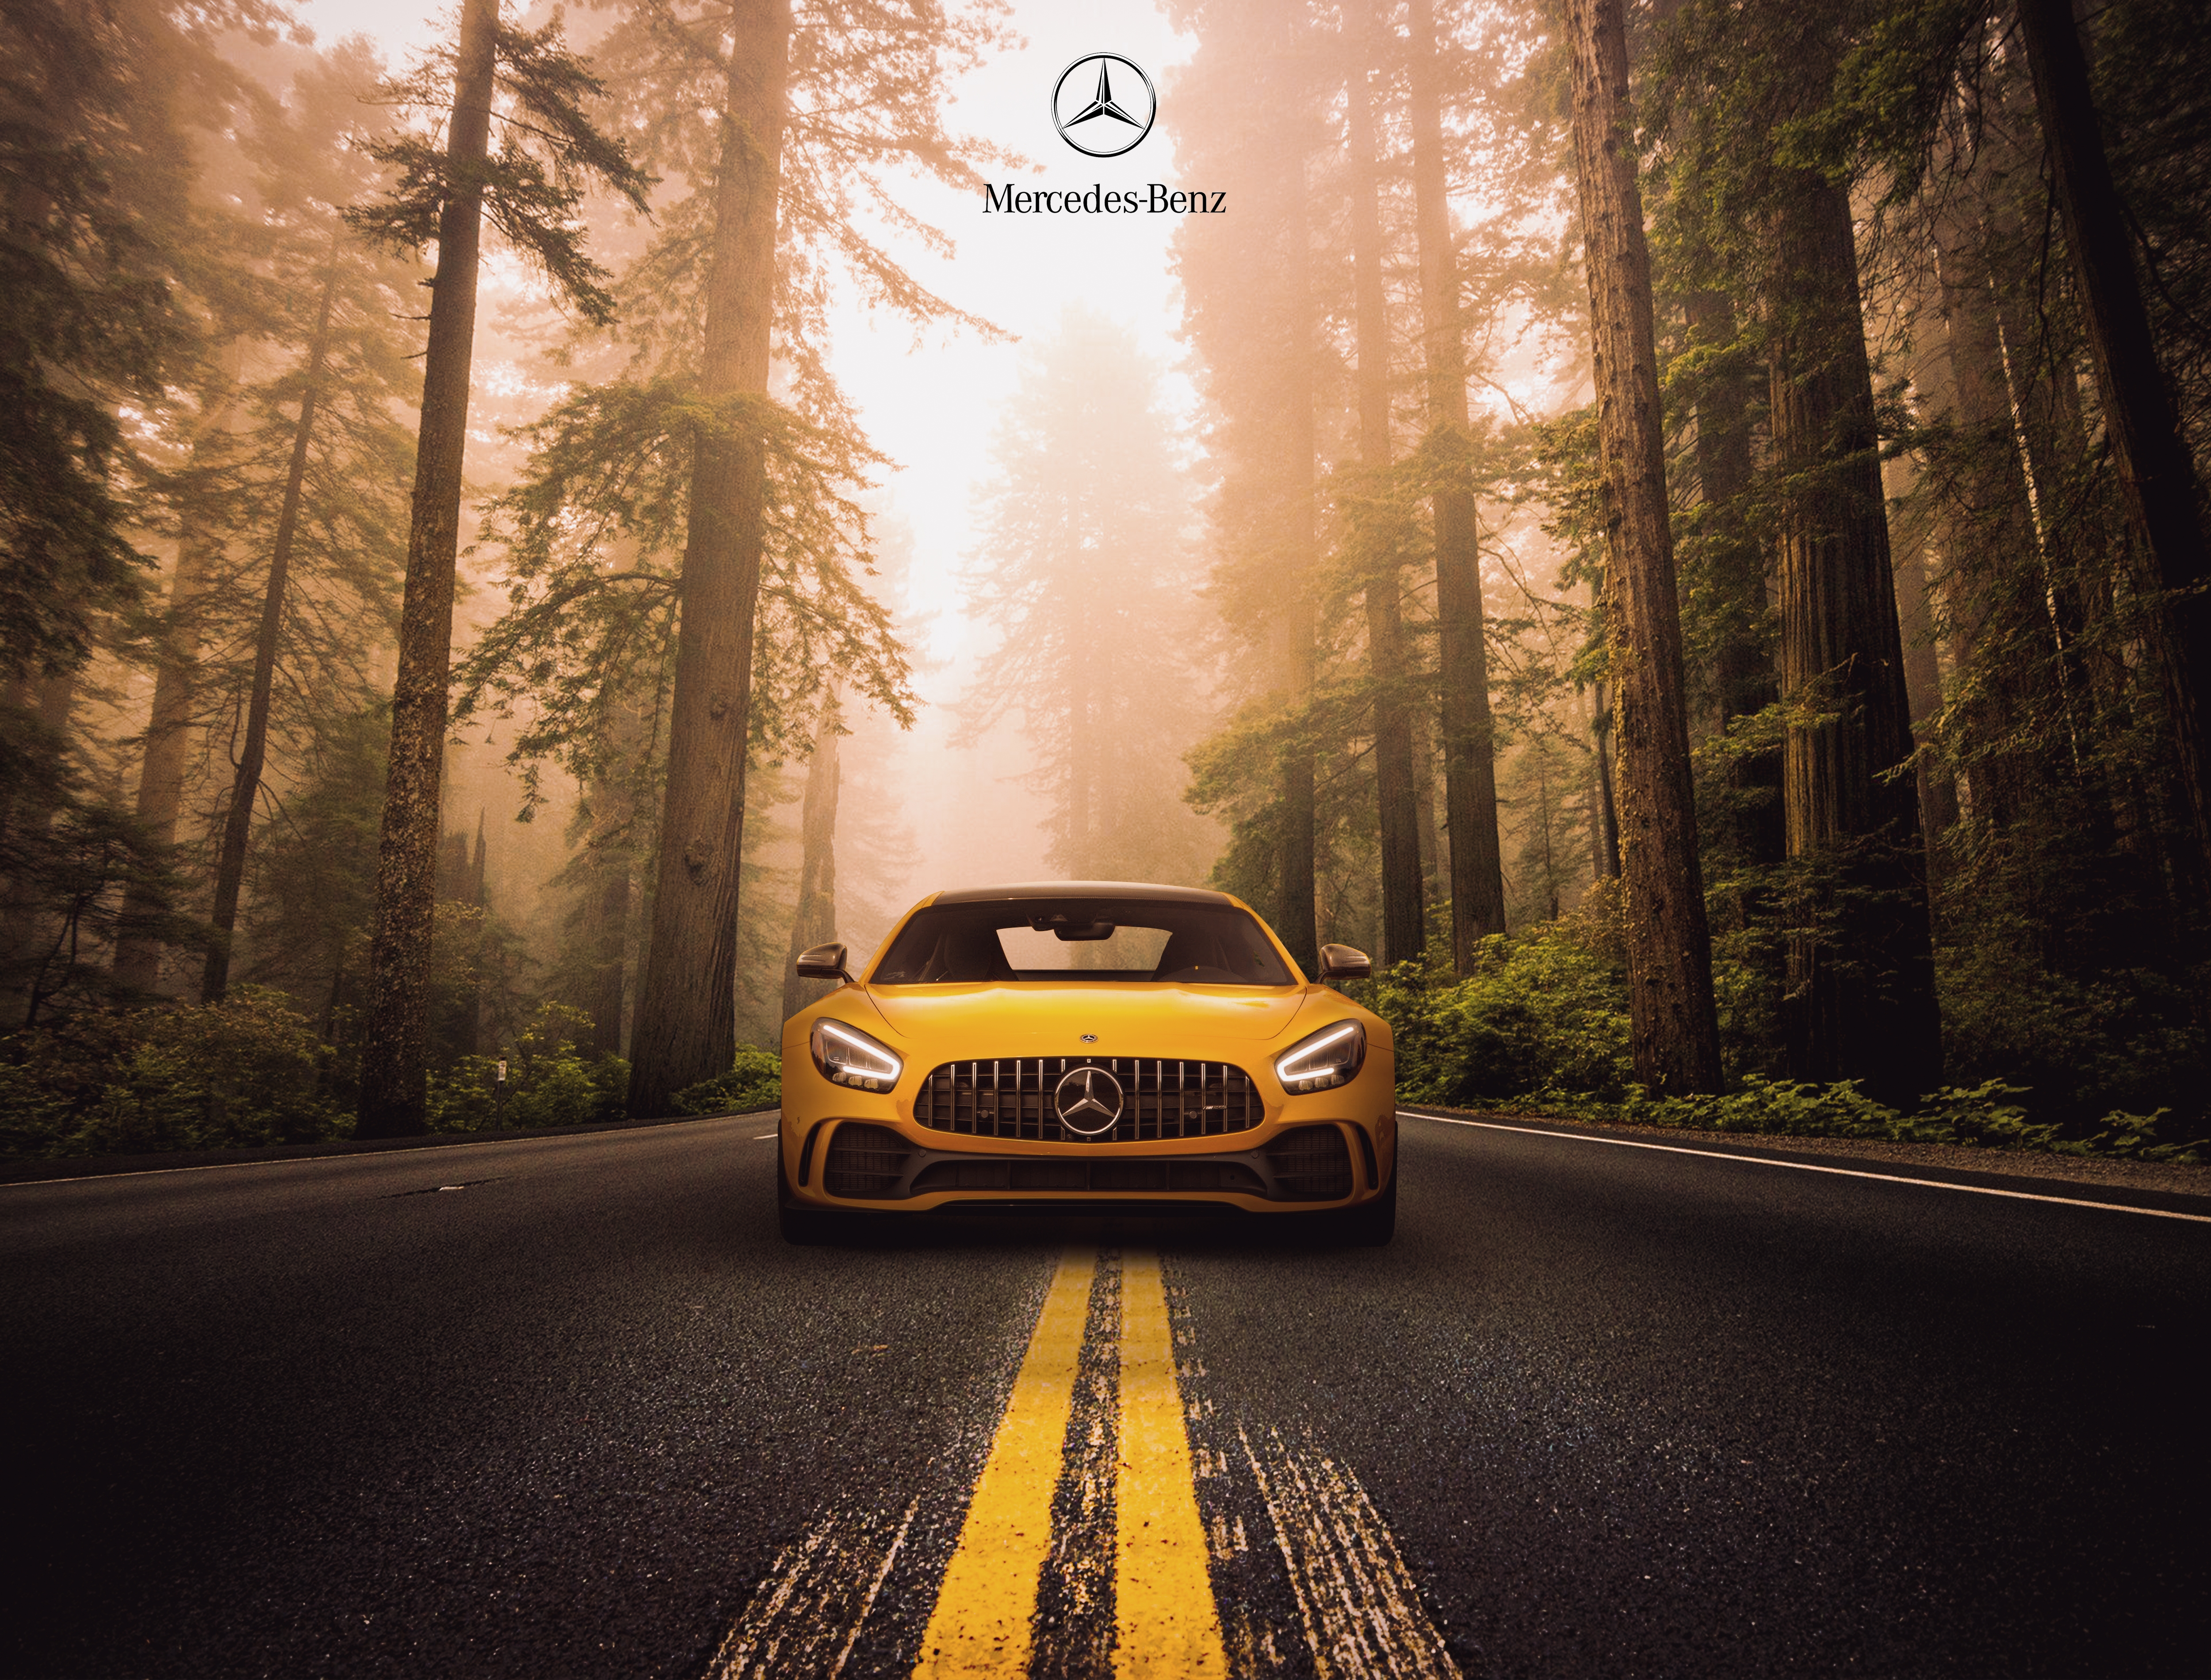 HD wallpaper, Sports Coupe, Mercedes Benz Amg Gt R, Road, Forest, 5K